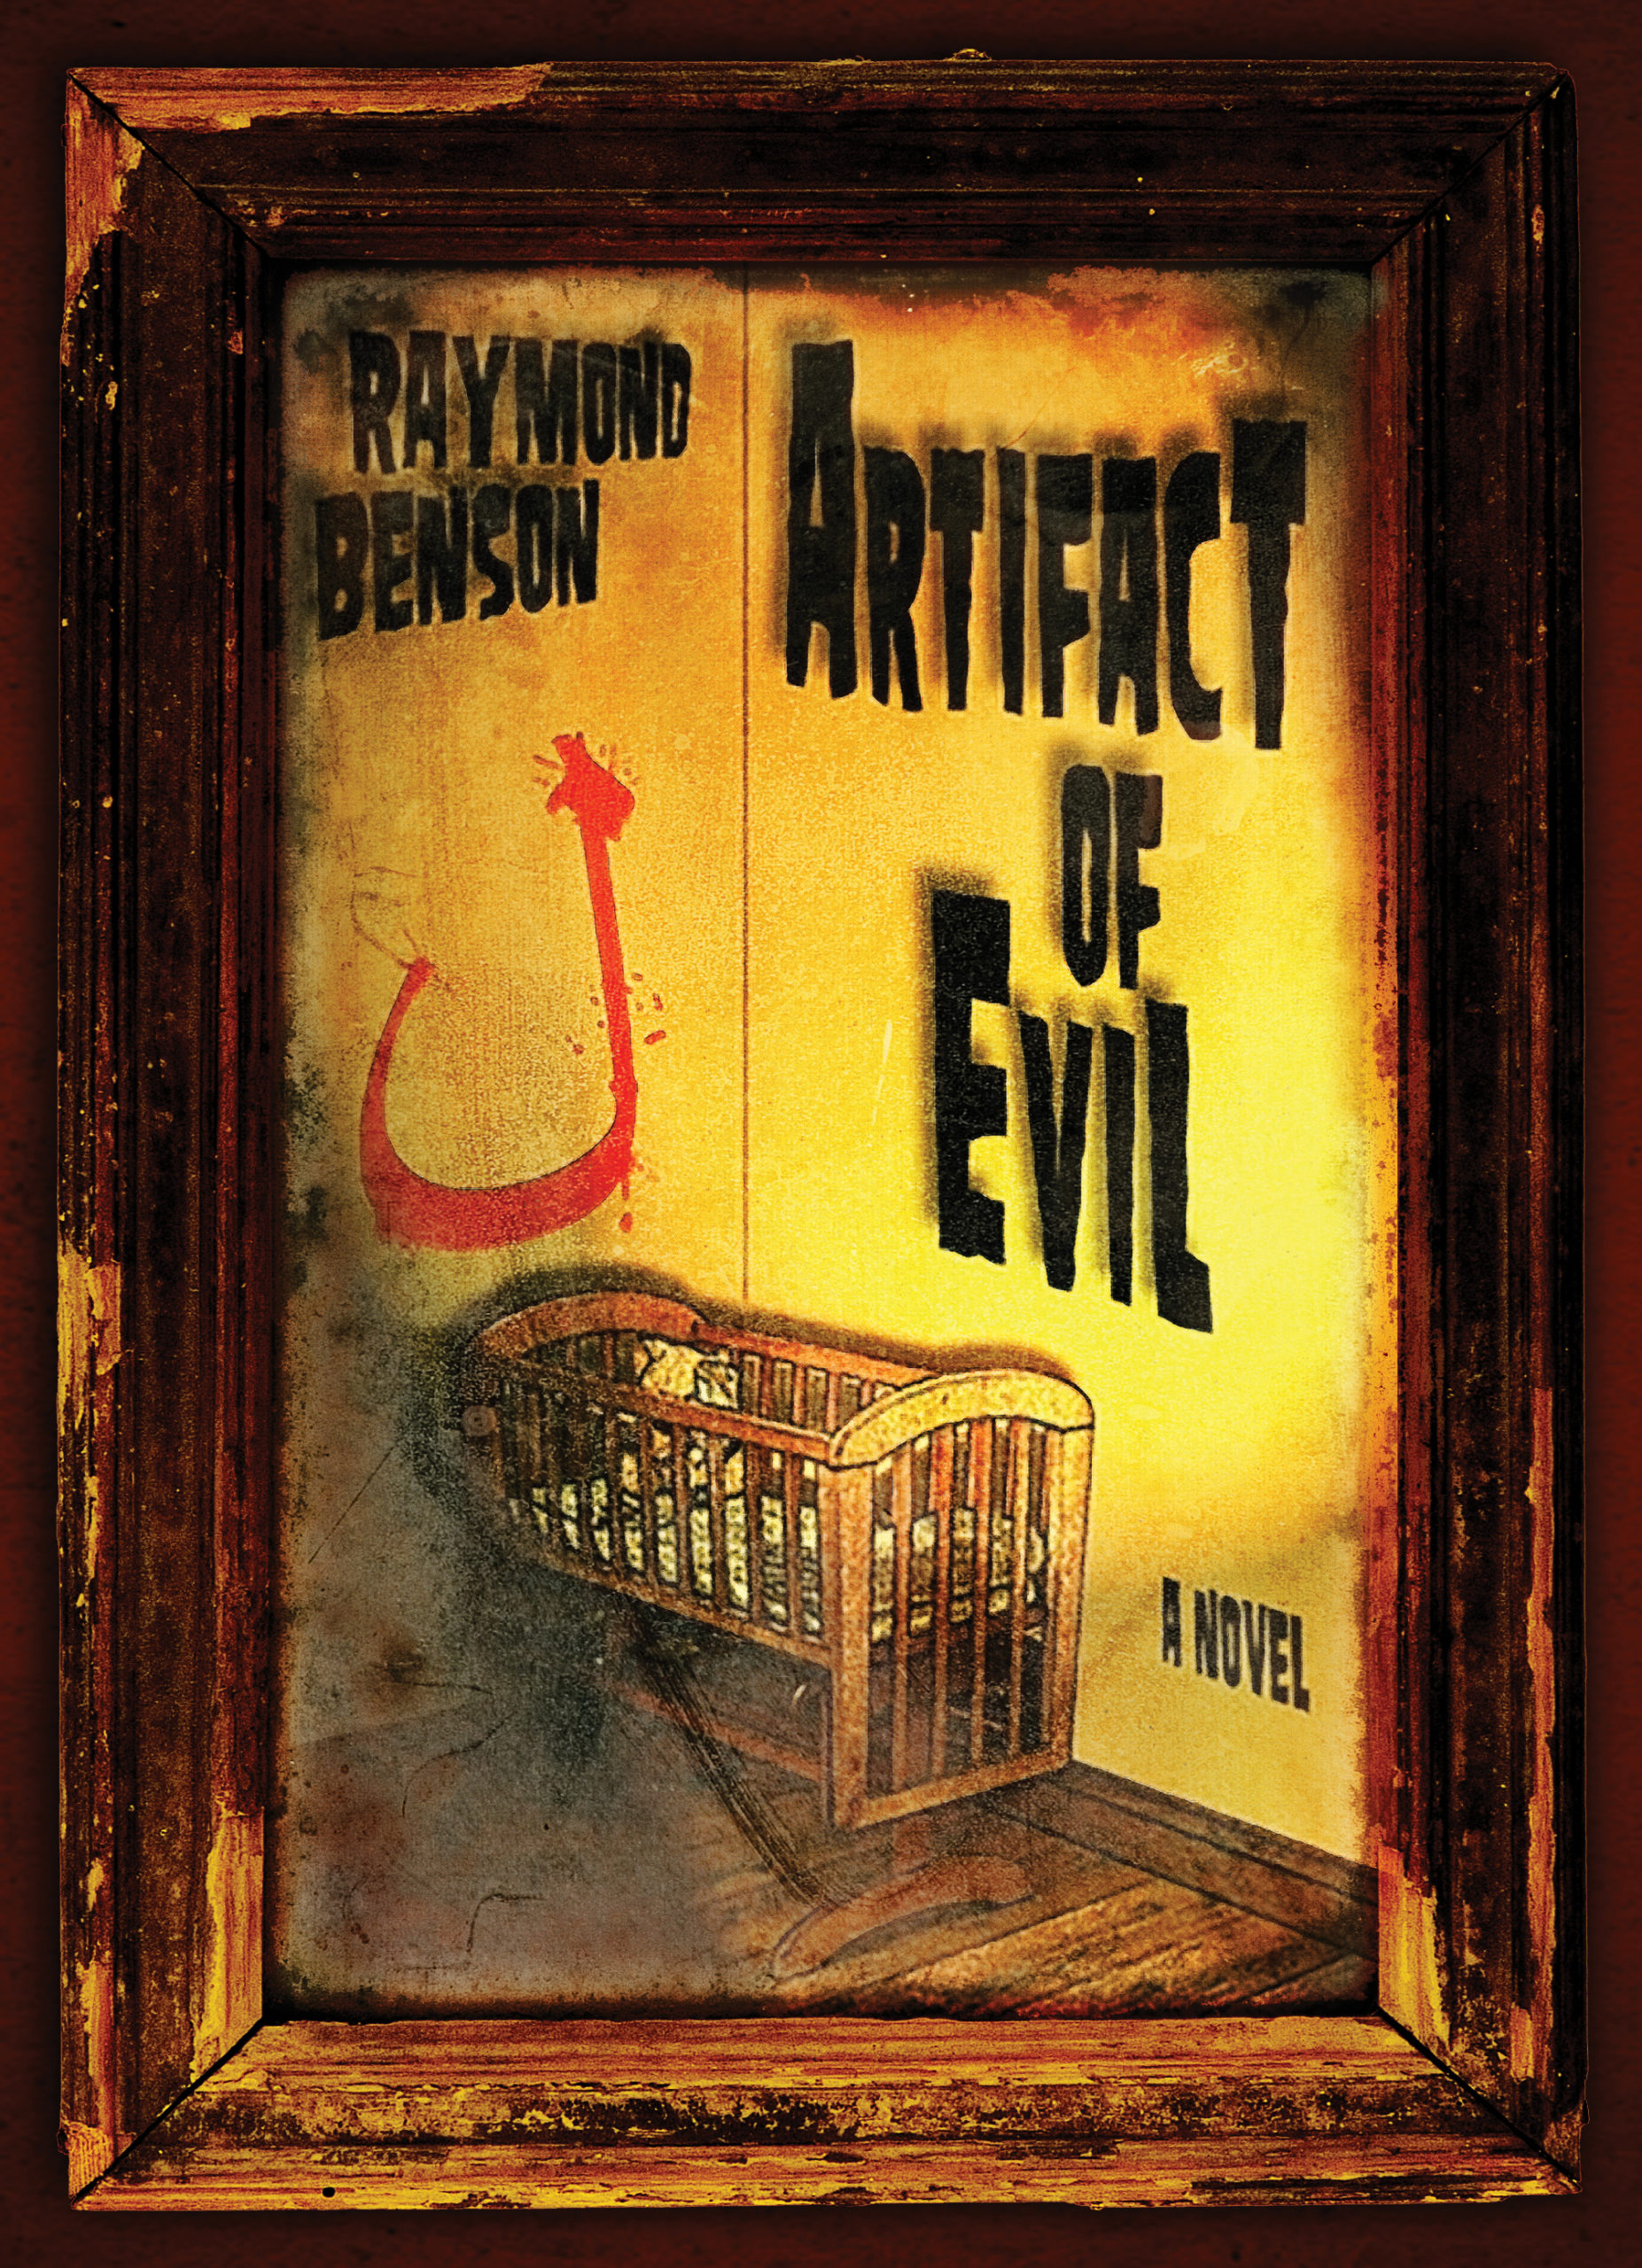 Artifact of Evil KWP Cover